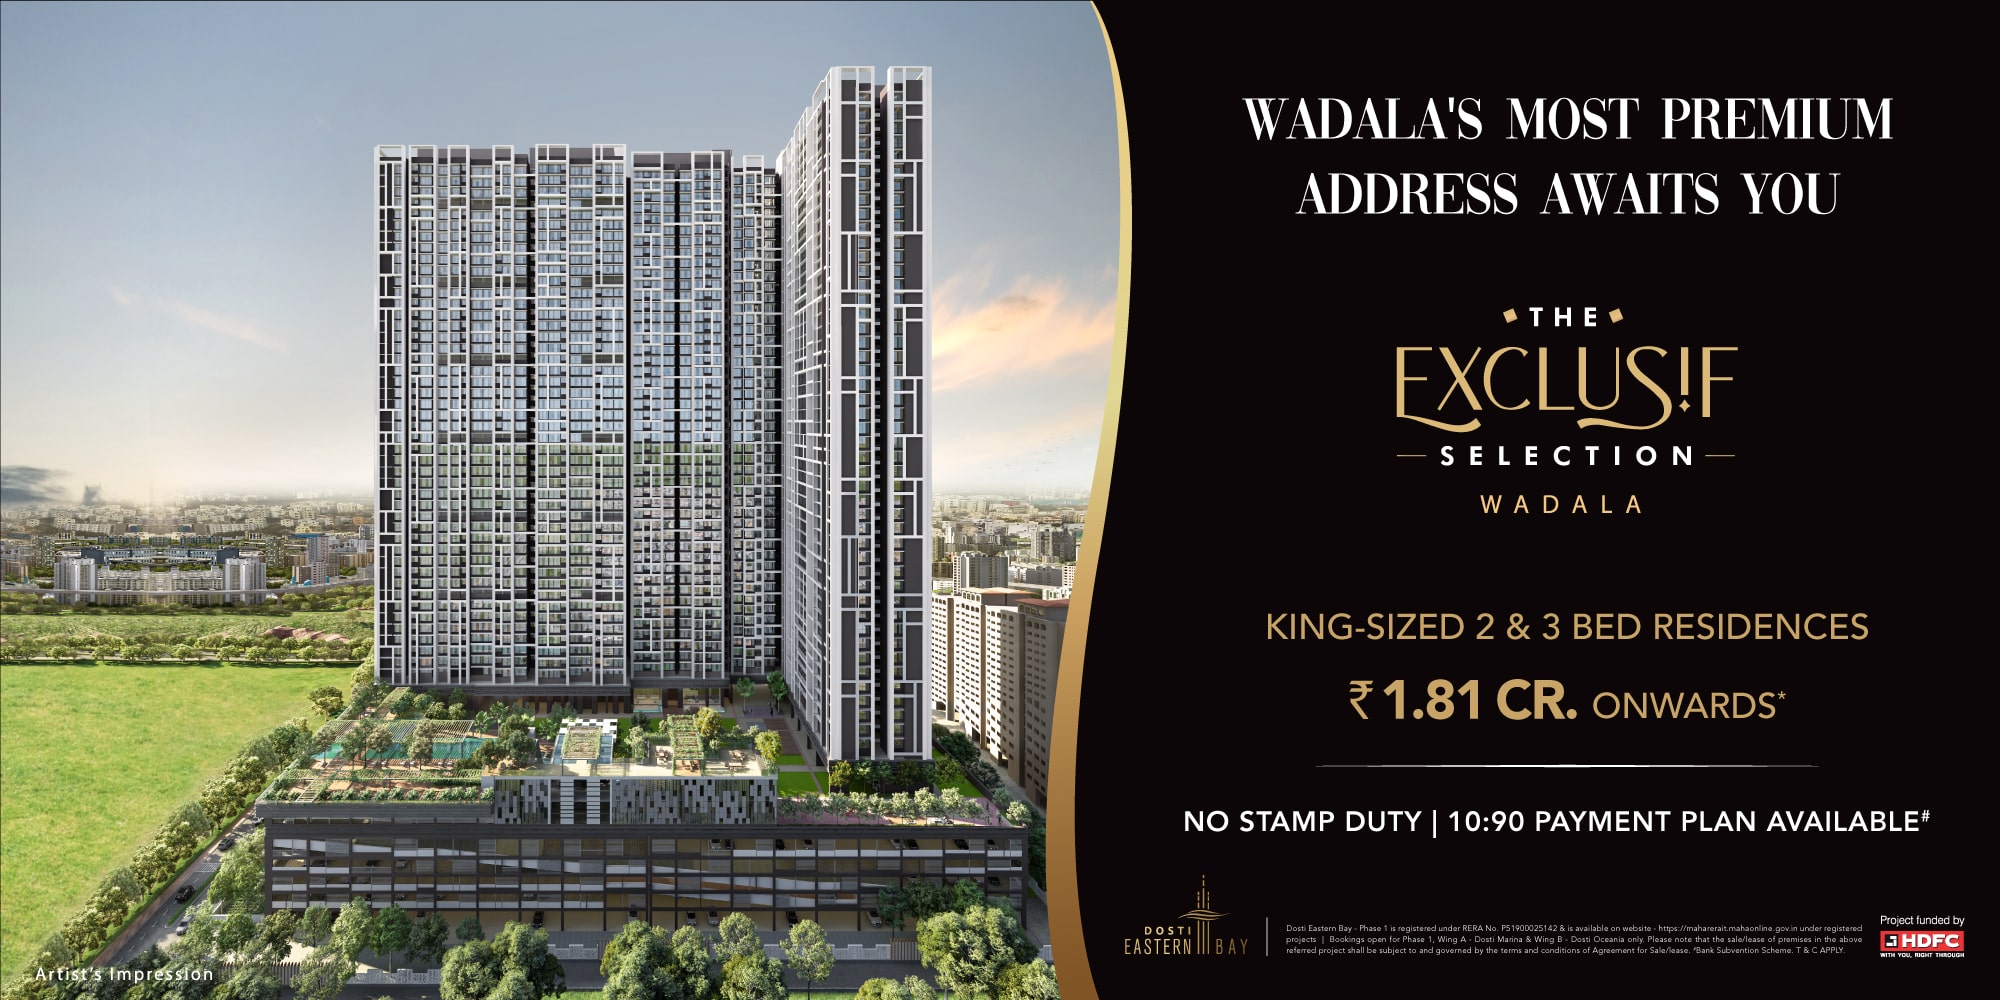 No stamp duty, 10:90 payment plan available at Dosti Eastern Bay, Mumbai